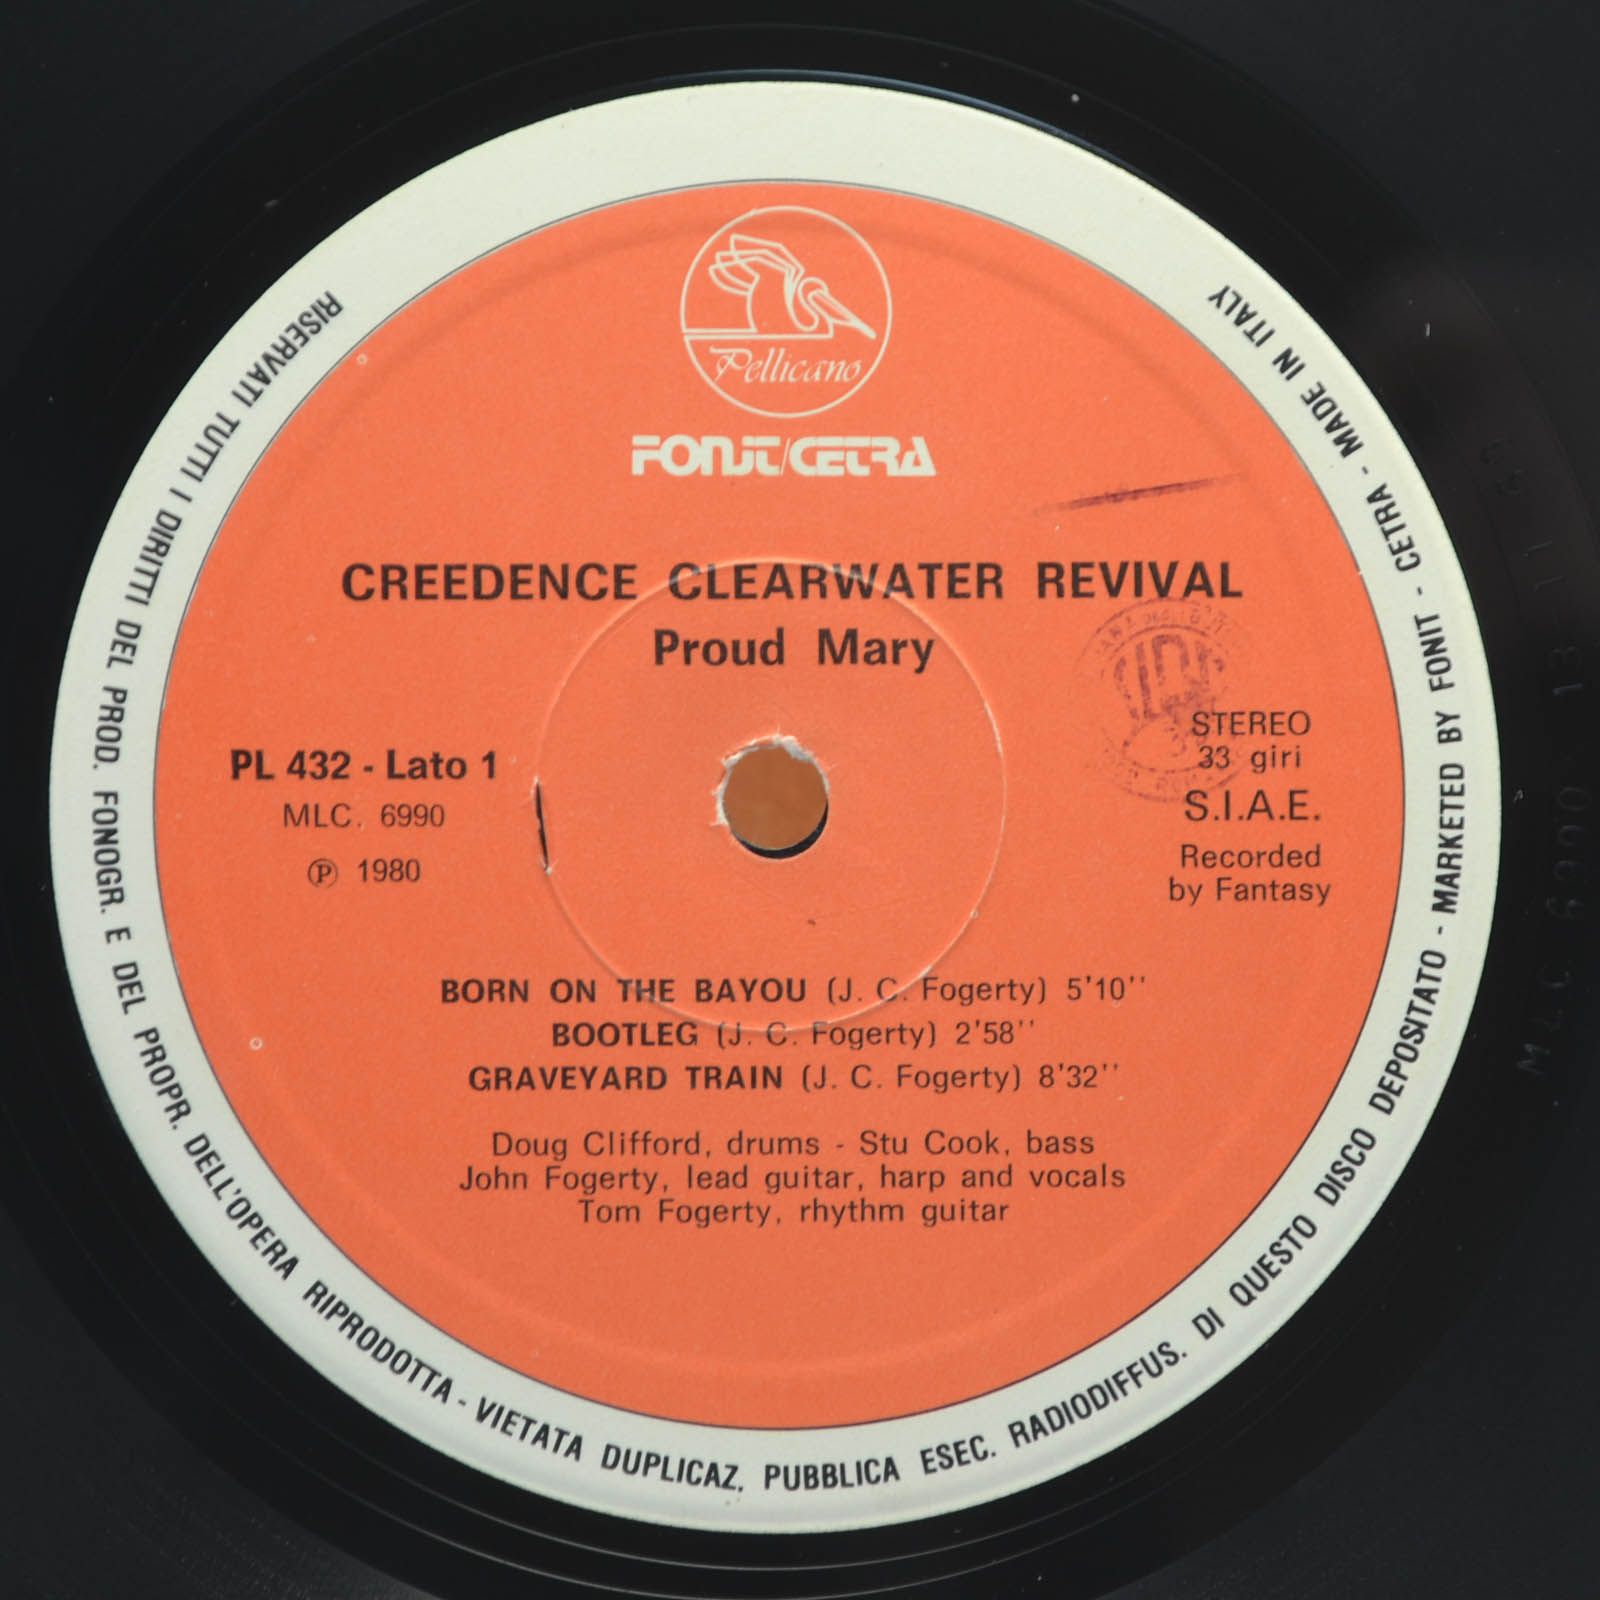 Creedence Clearwater Revival — Proud Mary, 1969